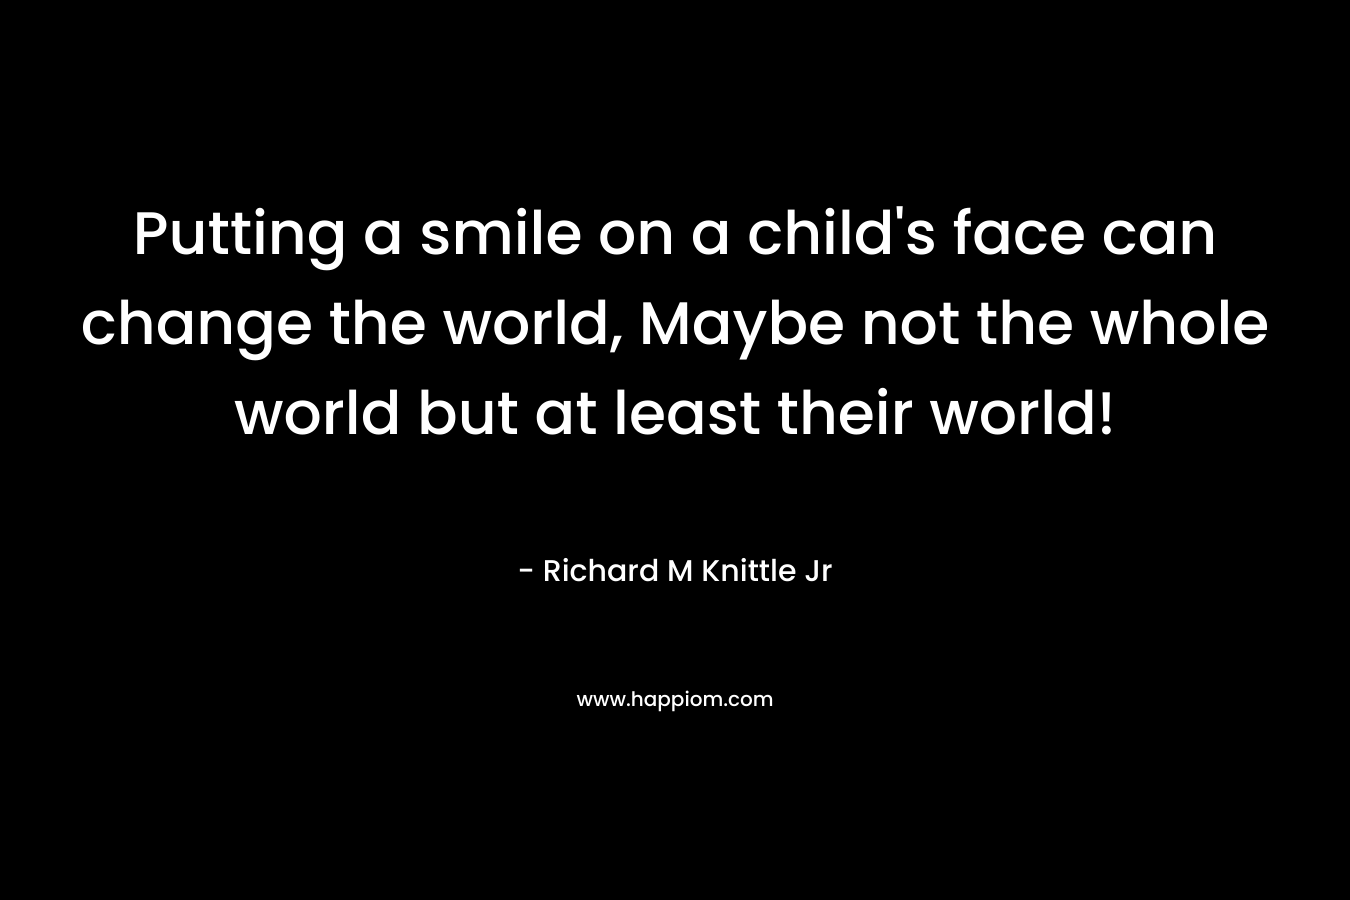 Putting a smile on a child's face can change the world, Maybe not the whole world but at least their world!